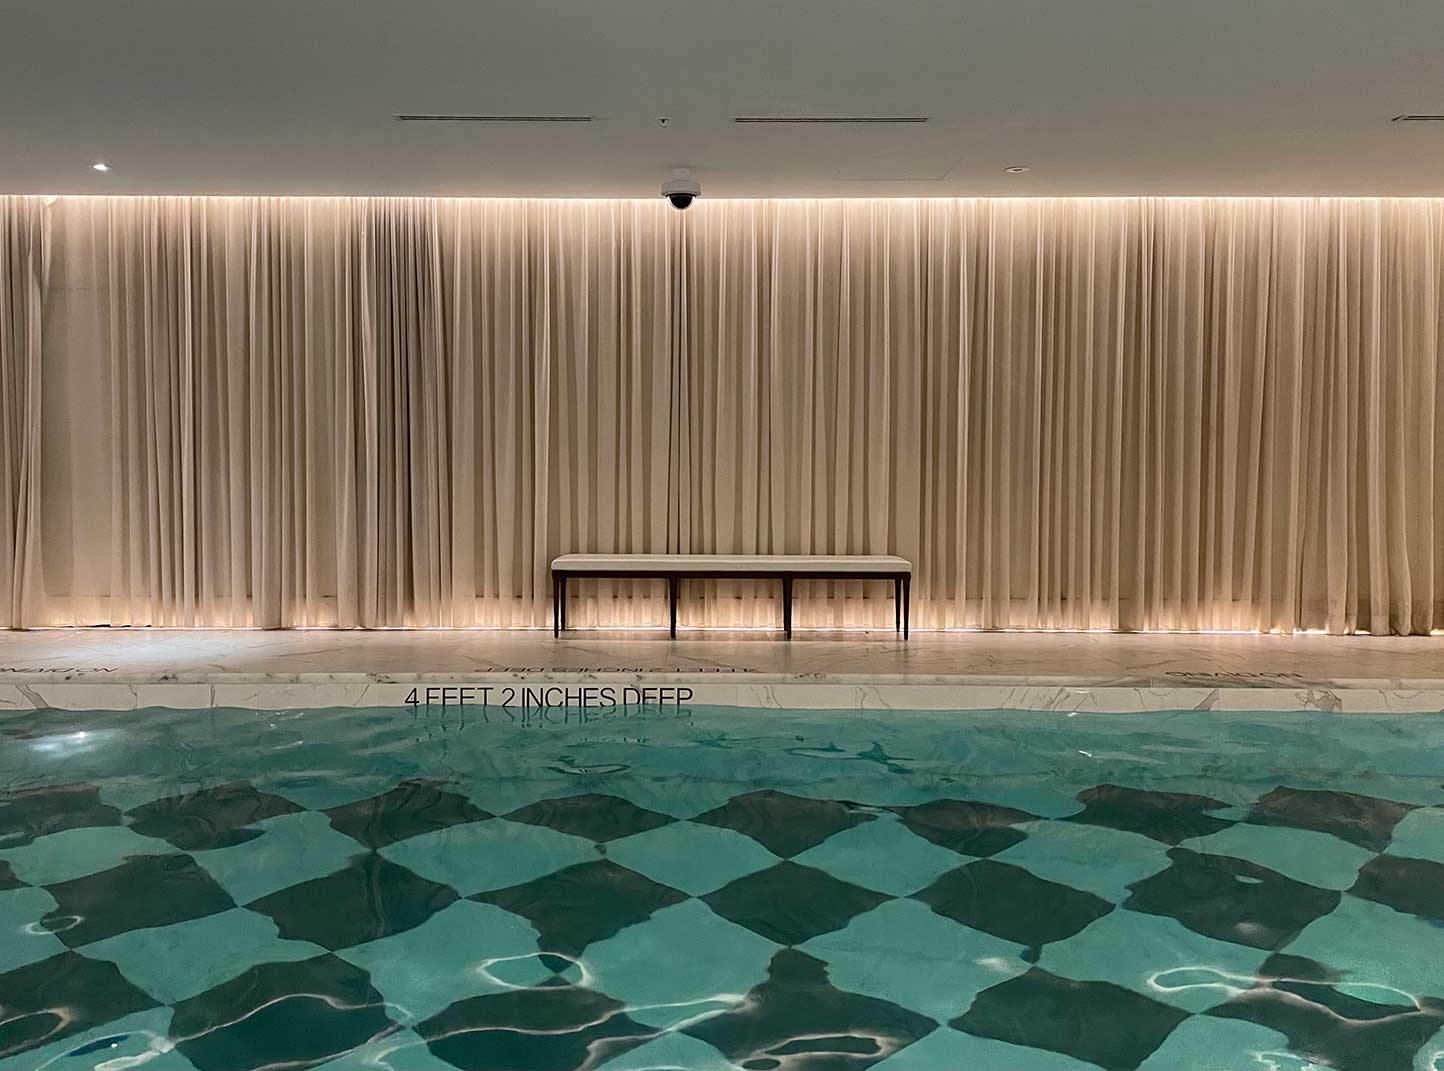 Baccarat Hotel Take a dip in the full-length pool or lounge in the whirlpool instead.